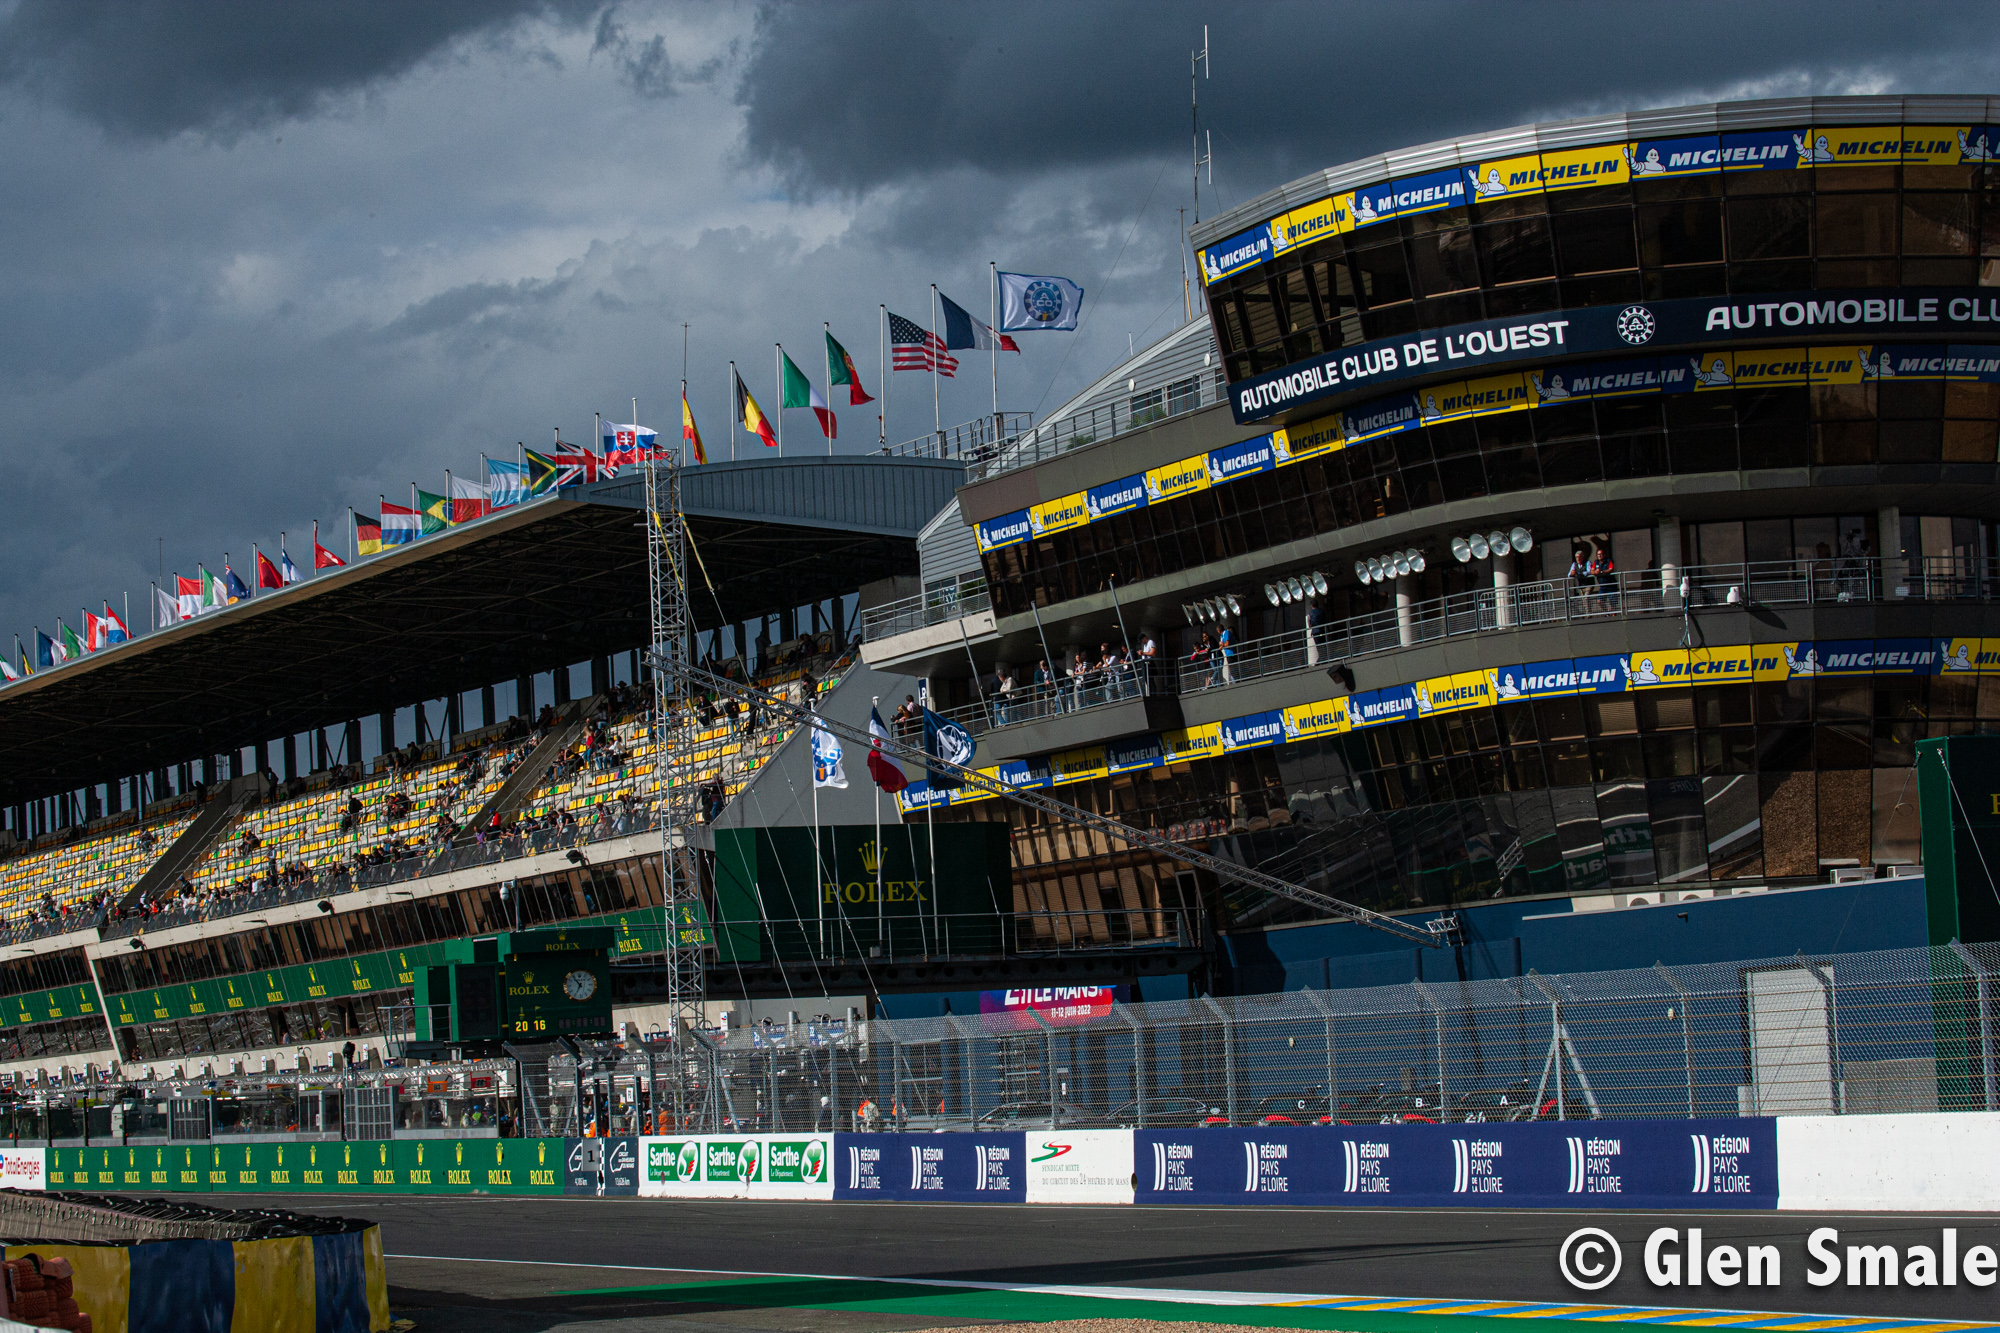 Le Mans race control tower and main grand stands